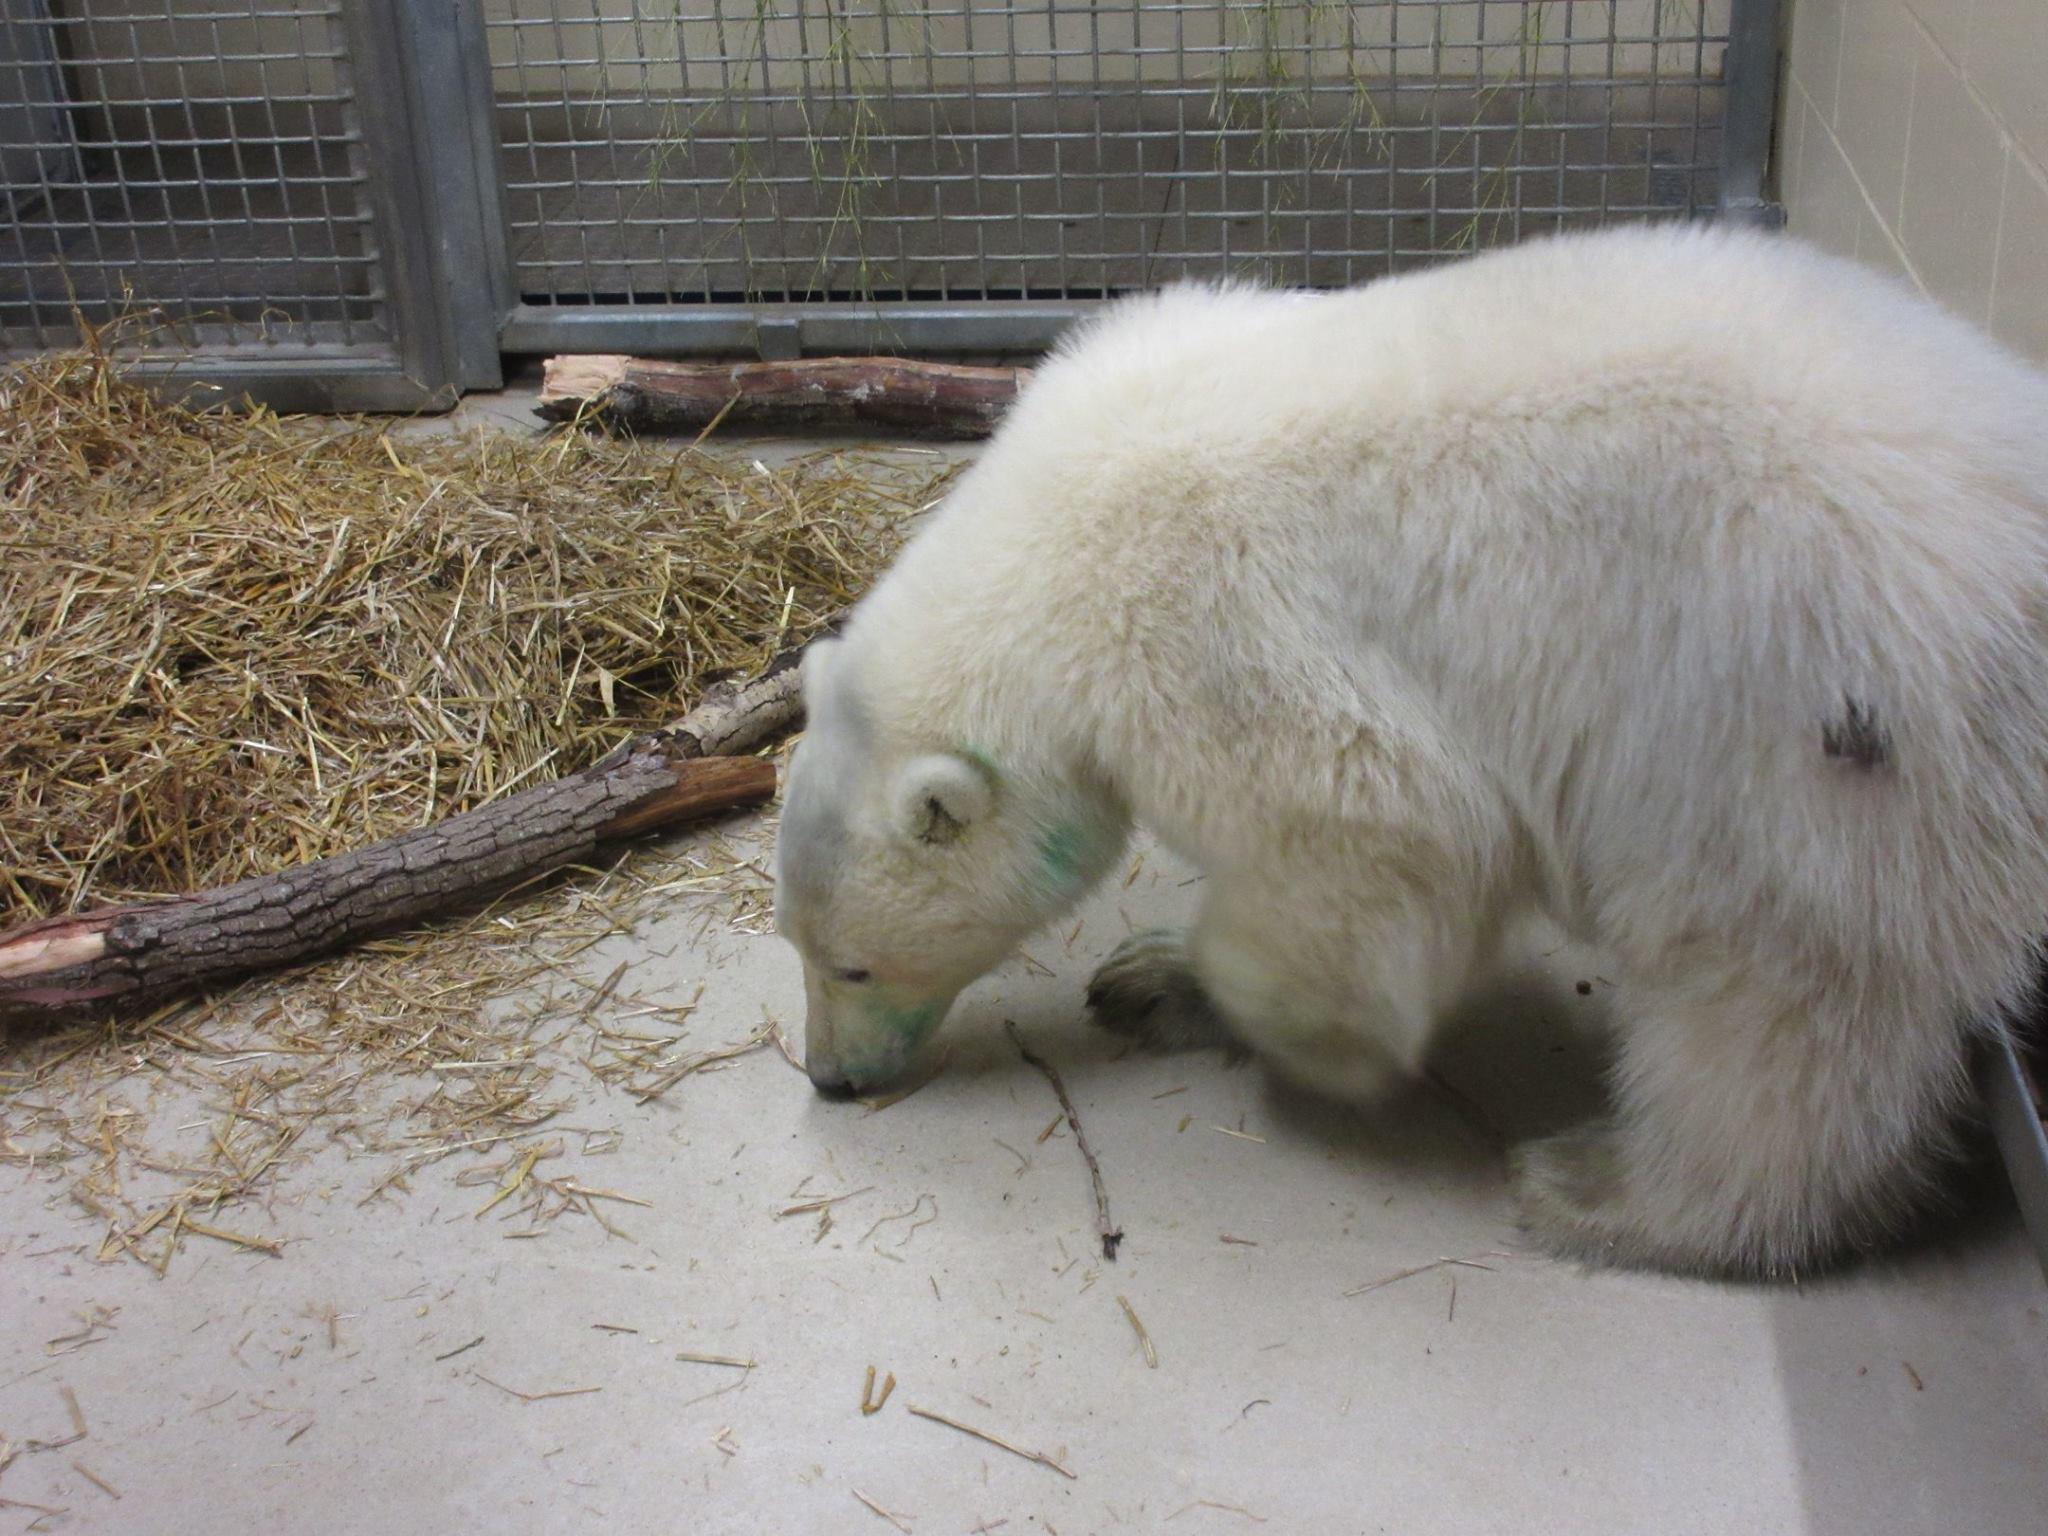 The zoo is home to seven other polar bears